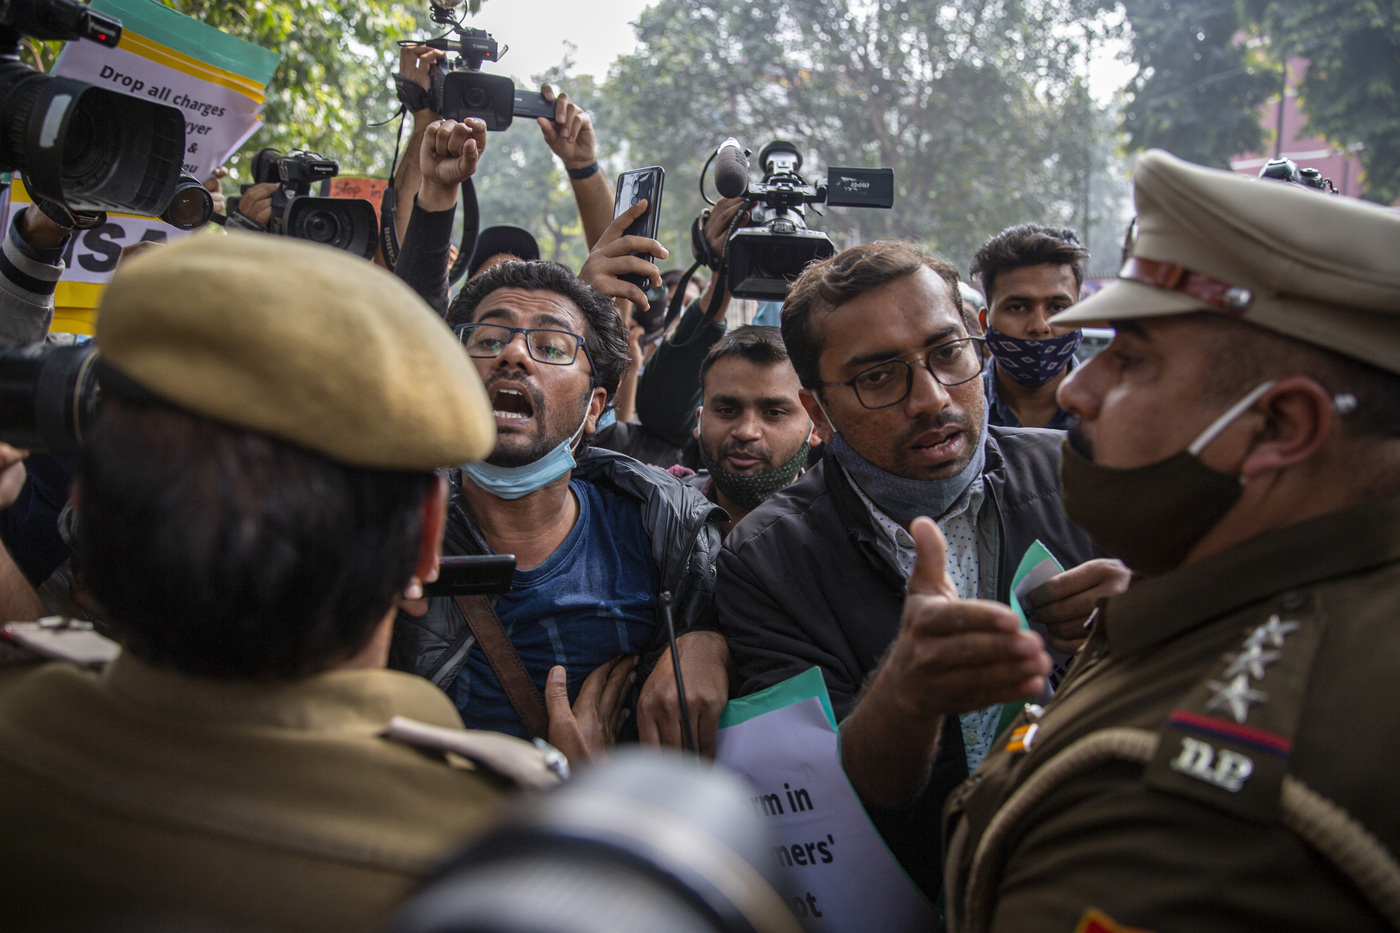 Police try to stop students protesting against the police action against various activists in New Delhi, India, Tuesday, Feb. 16, 2021. Police on Saturday arrested climate activist Disha Ravi, for circulating a document on social media supporting months of massive protests by farmers. Police also issued arrest warrants for two other activists, Nikita Jacob and Shantanu Muluk, saying the three created the document and shared it with others. According to police, the sharing of the document on social media indicated there was a “conspiracy” behind violence on Jan. 26, India's Republic Day, when the largely peaceful farmer protests erupted into clashes with police. (AP Photo/Altaf Qadri)